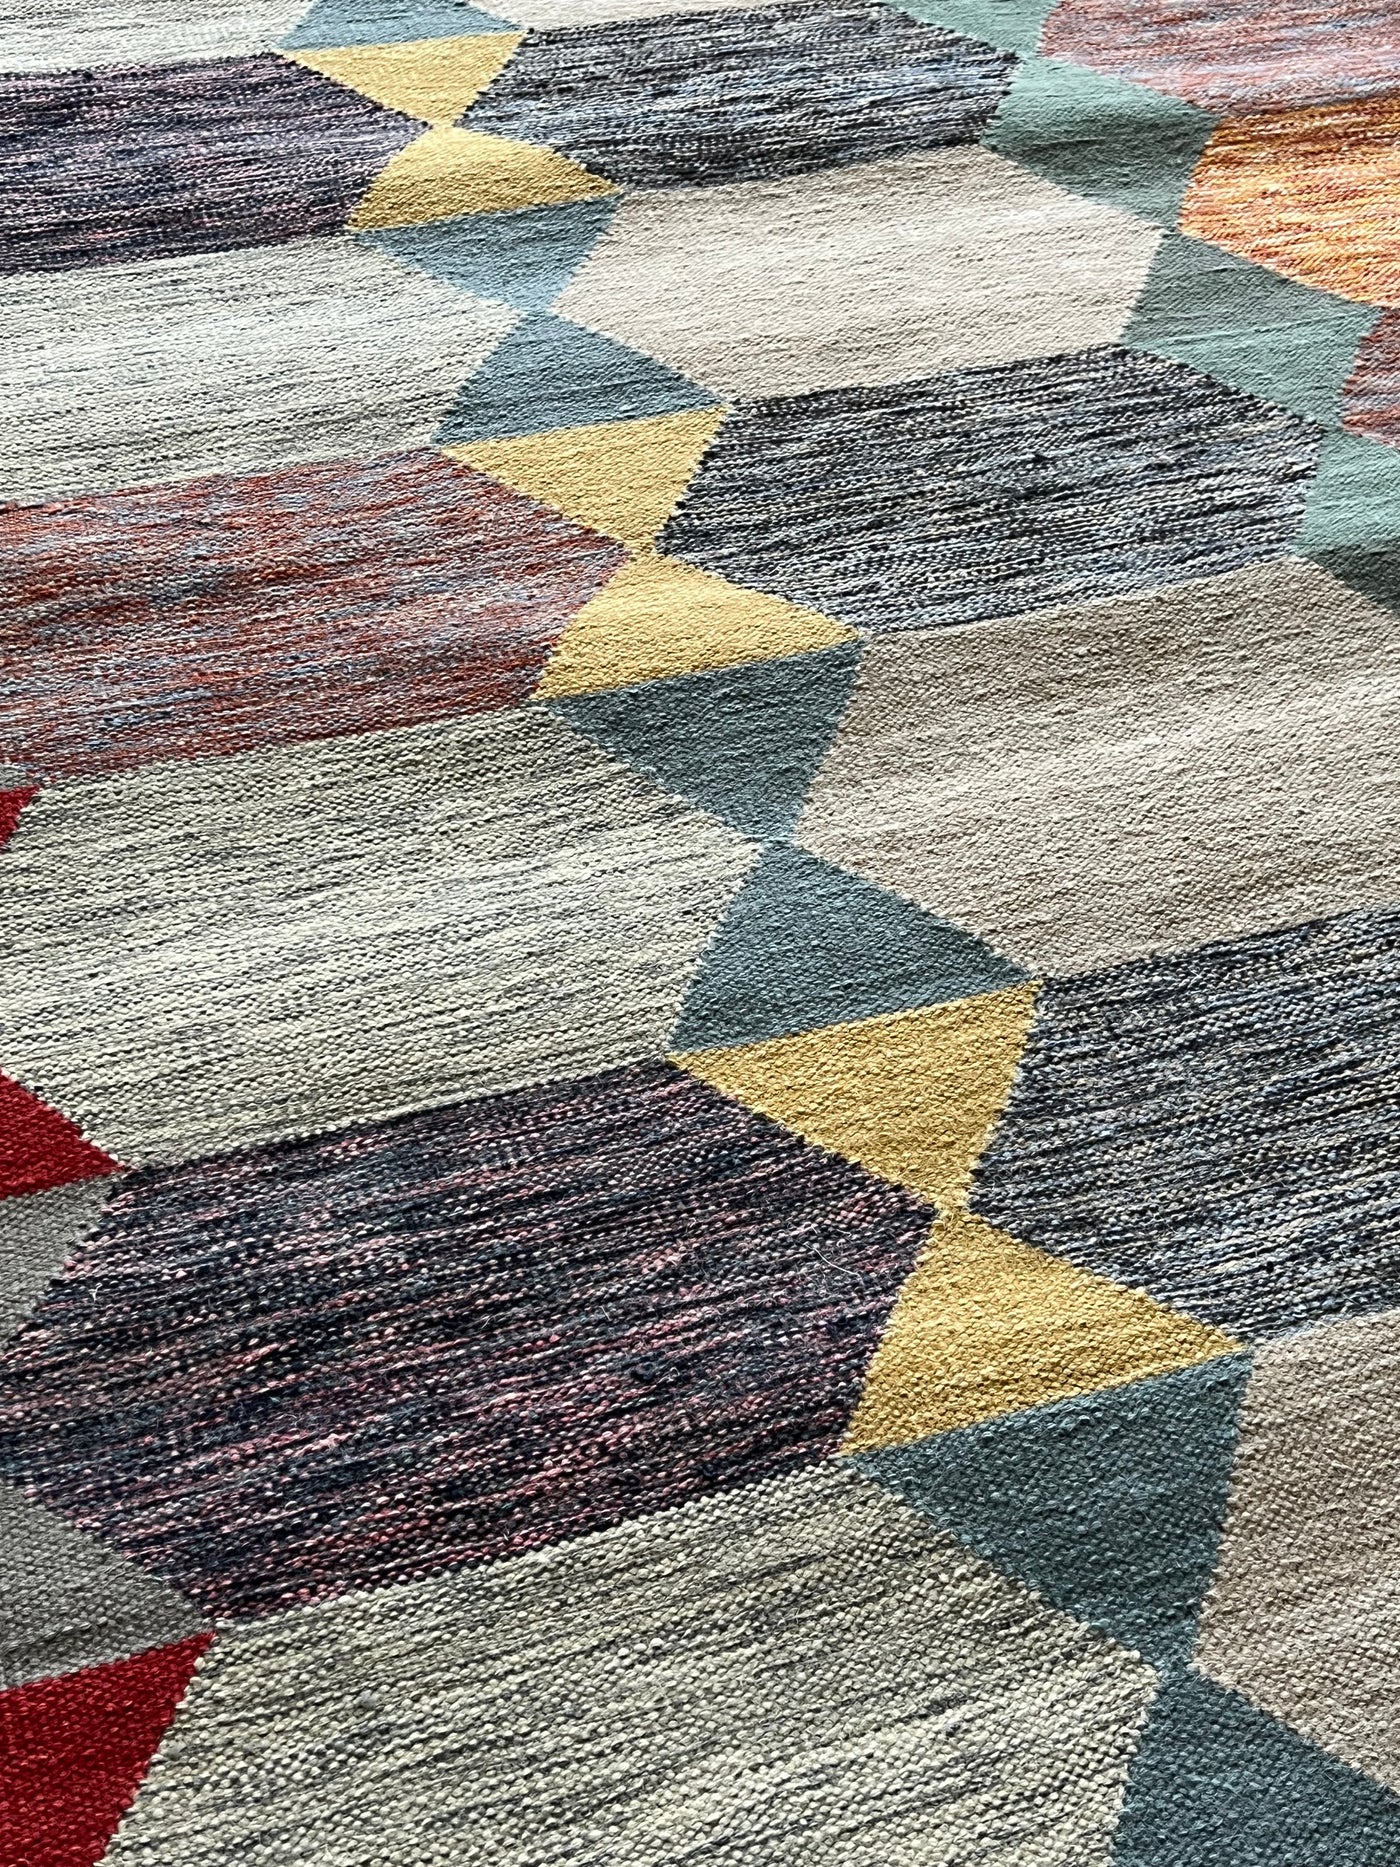 The Coleman Rug